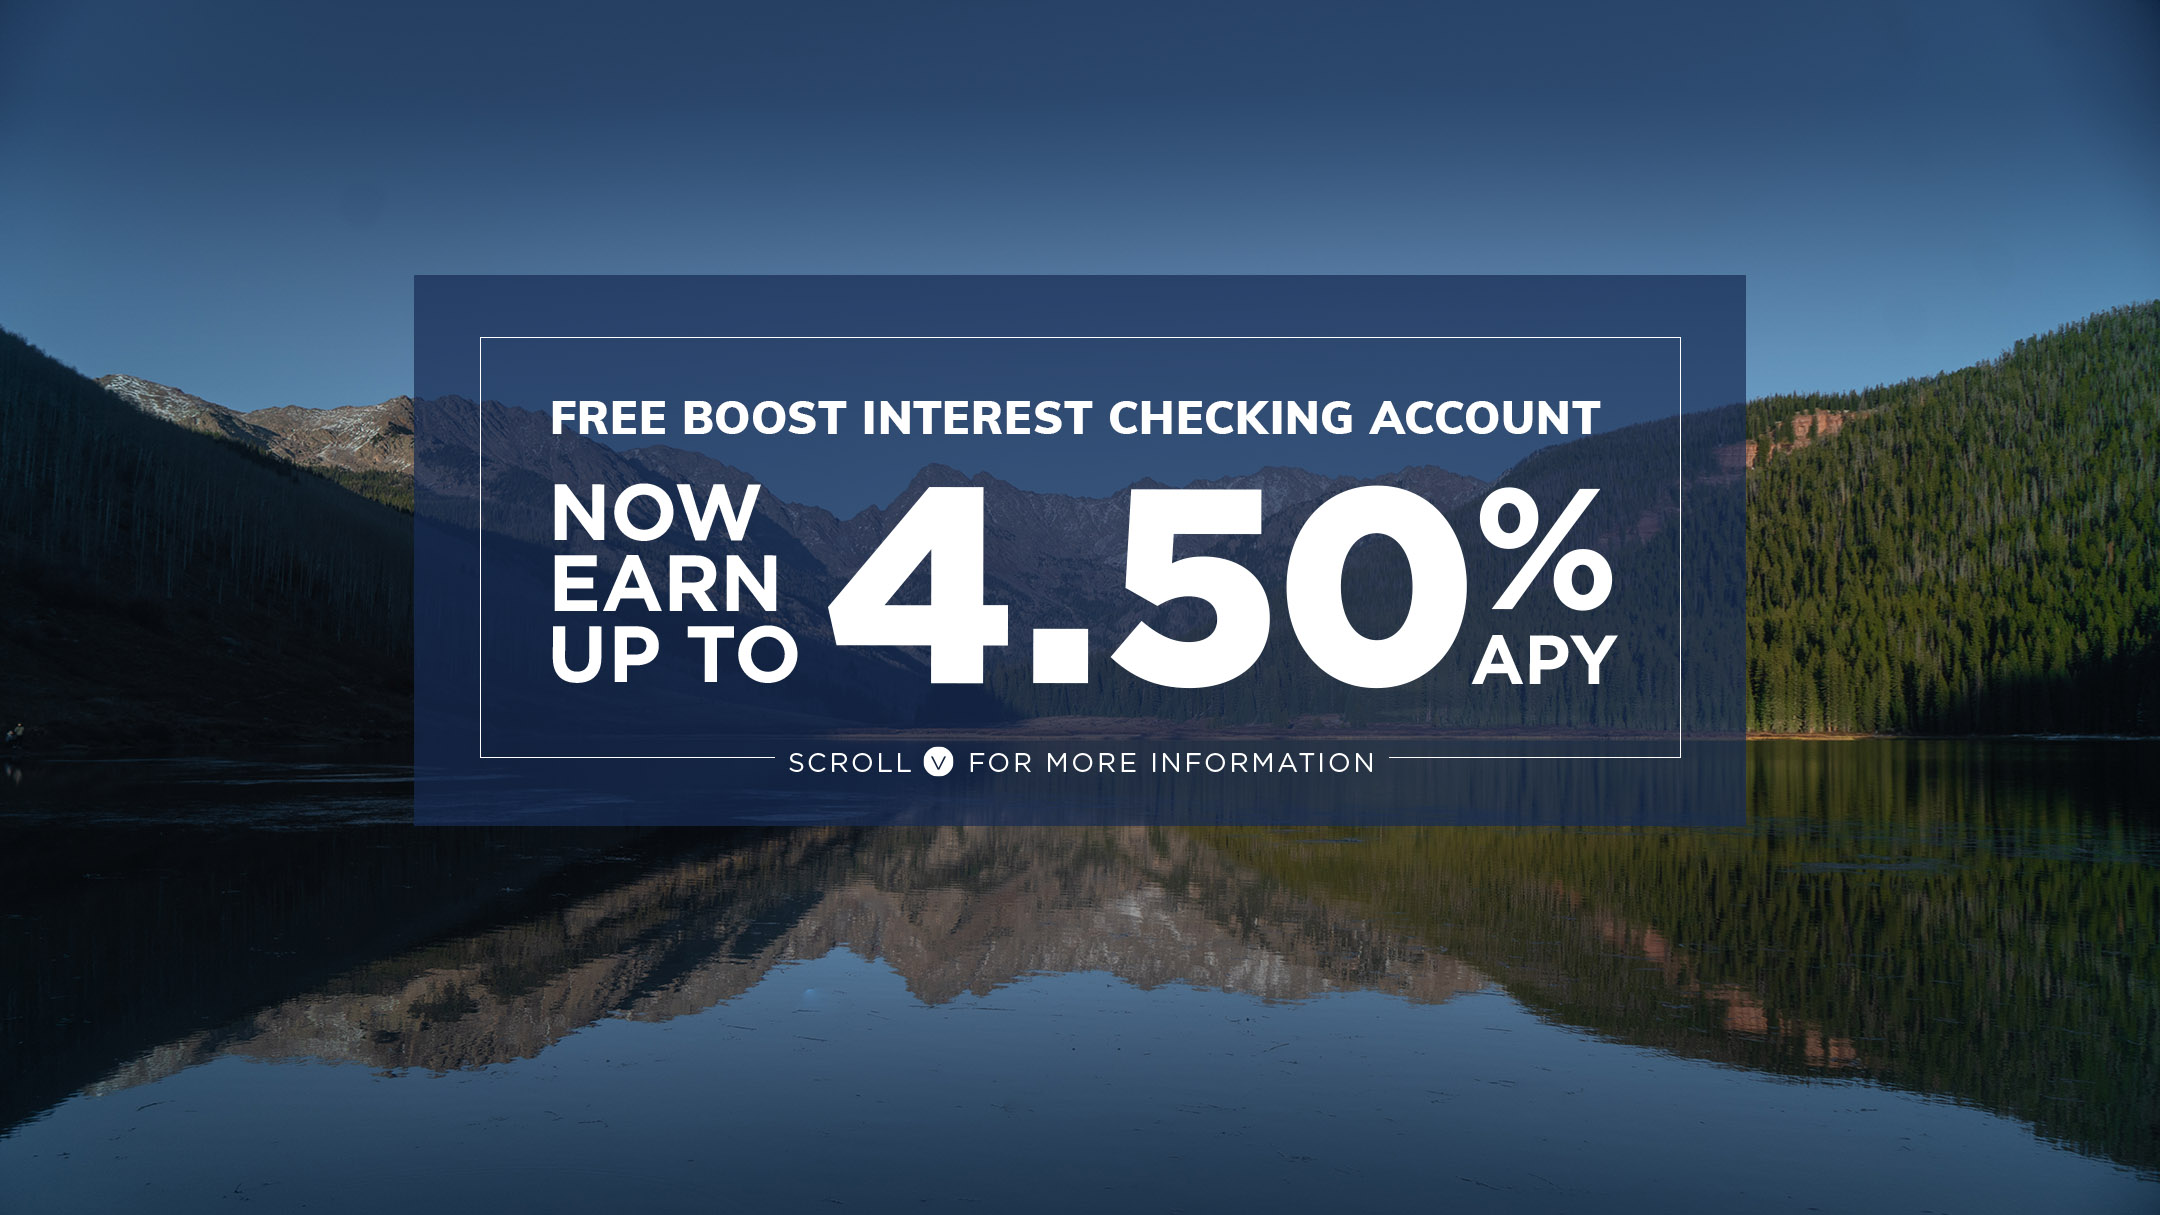 Free Boost Interest Checking Account. Now earn up to 4.50% APY. Scroll down for more information.